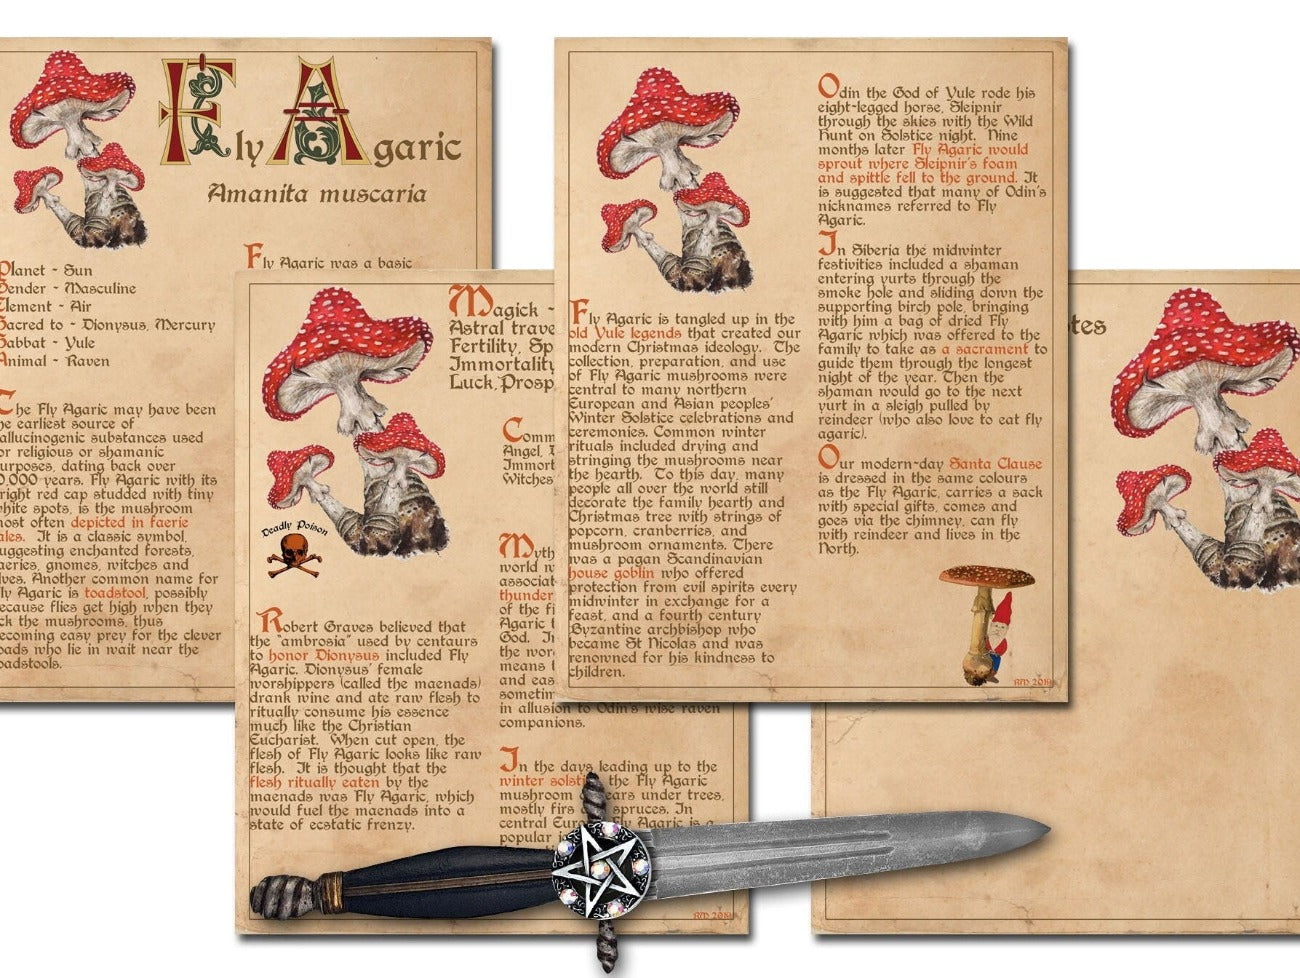 FLY AGARIC BANEFUL Herb Printable 4 Pages - Morgana Magick Spell